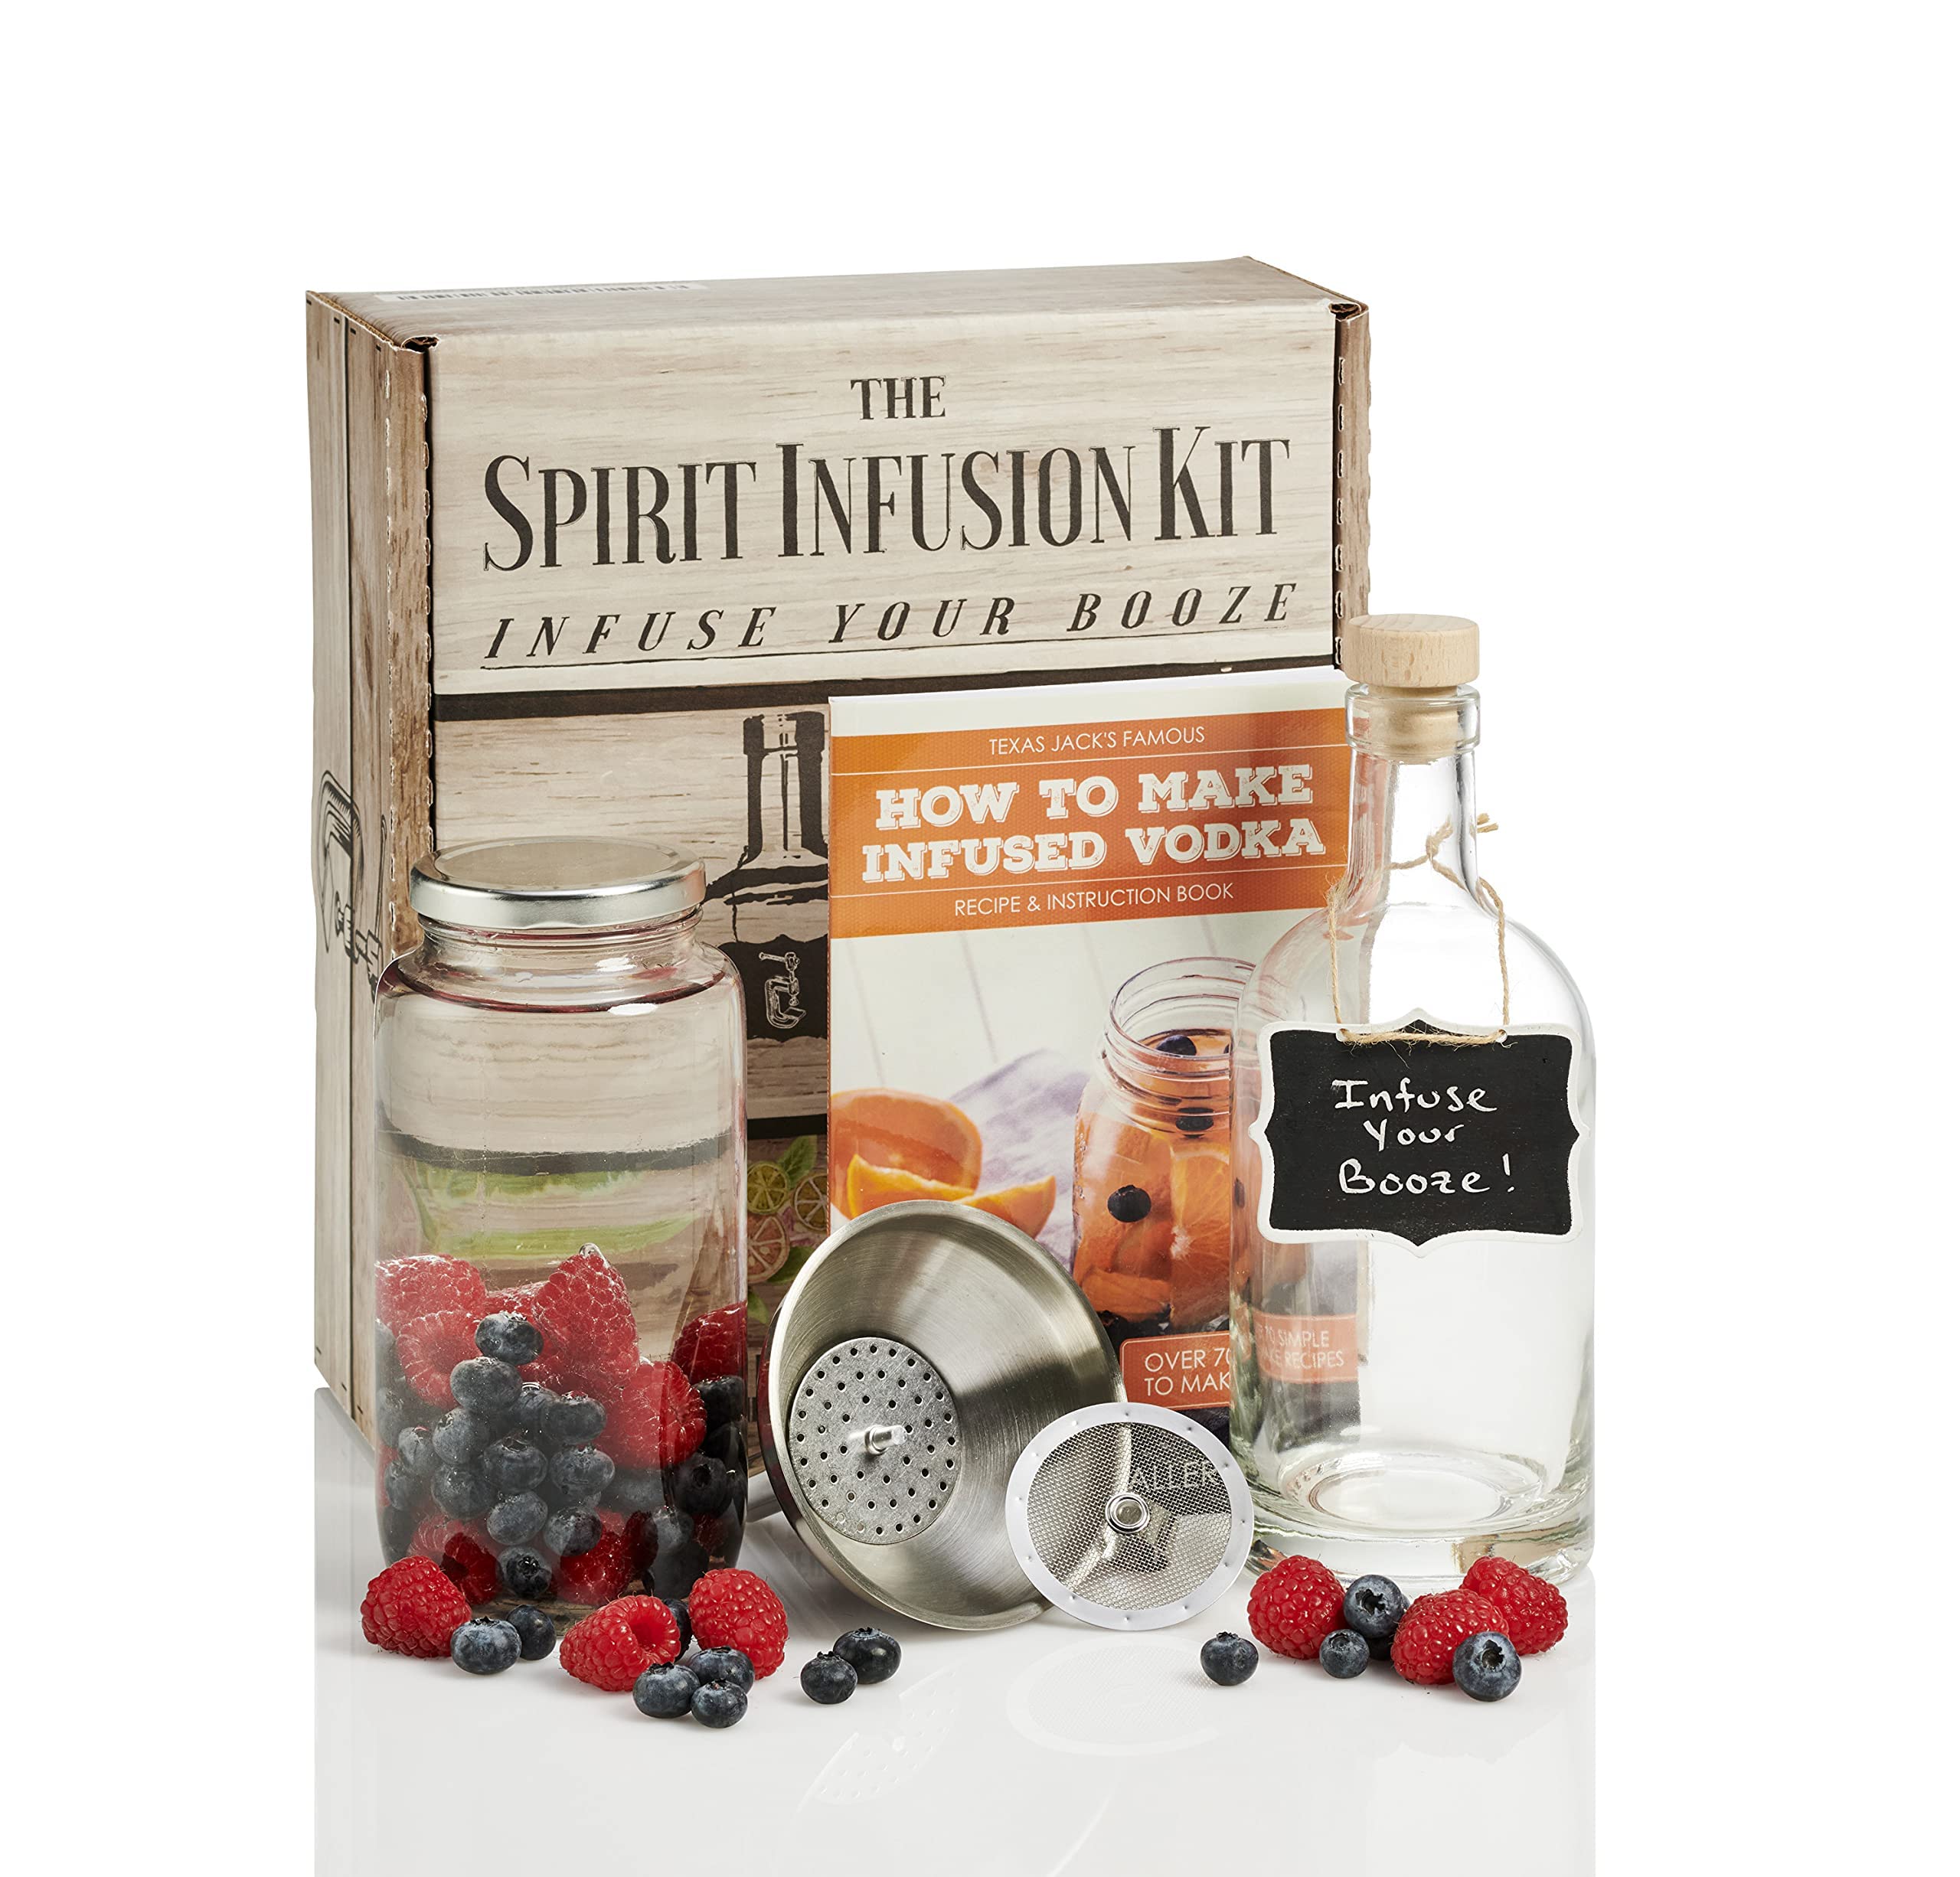 Infuse Your Booze